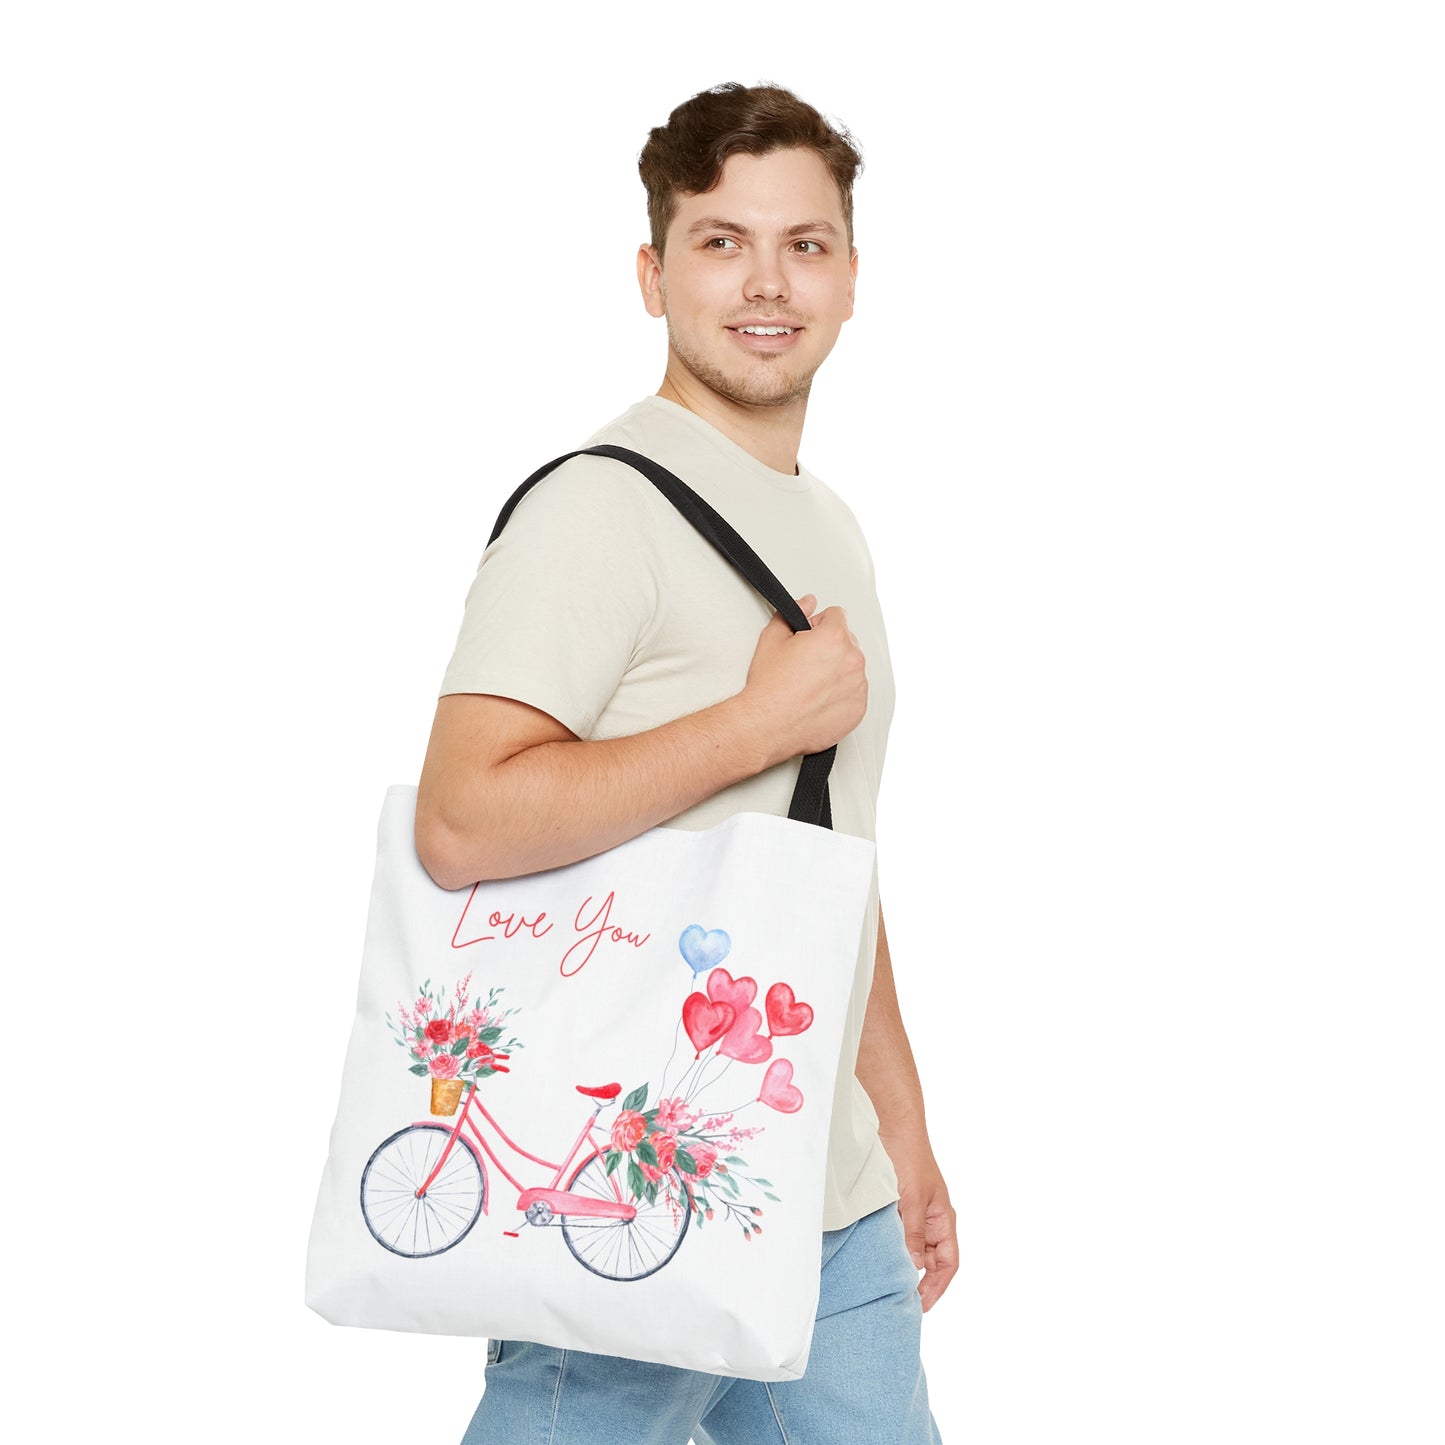 Love You with Bicycle and Heart Baloons Printed Tote Bag, Valentine's Tote Bag